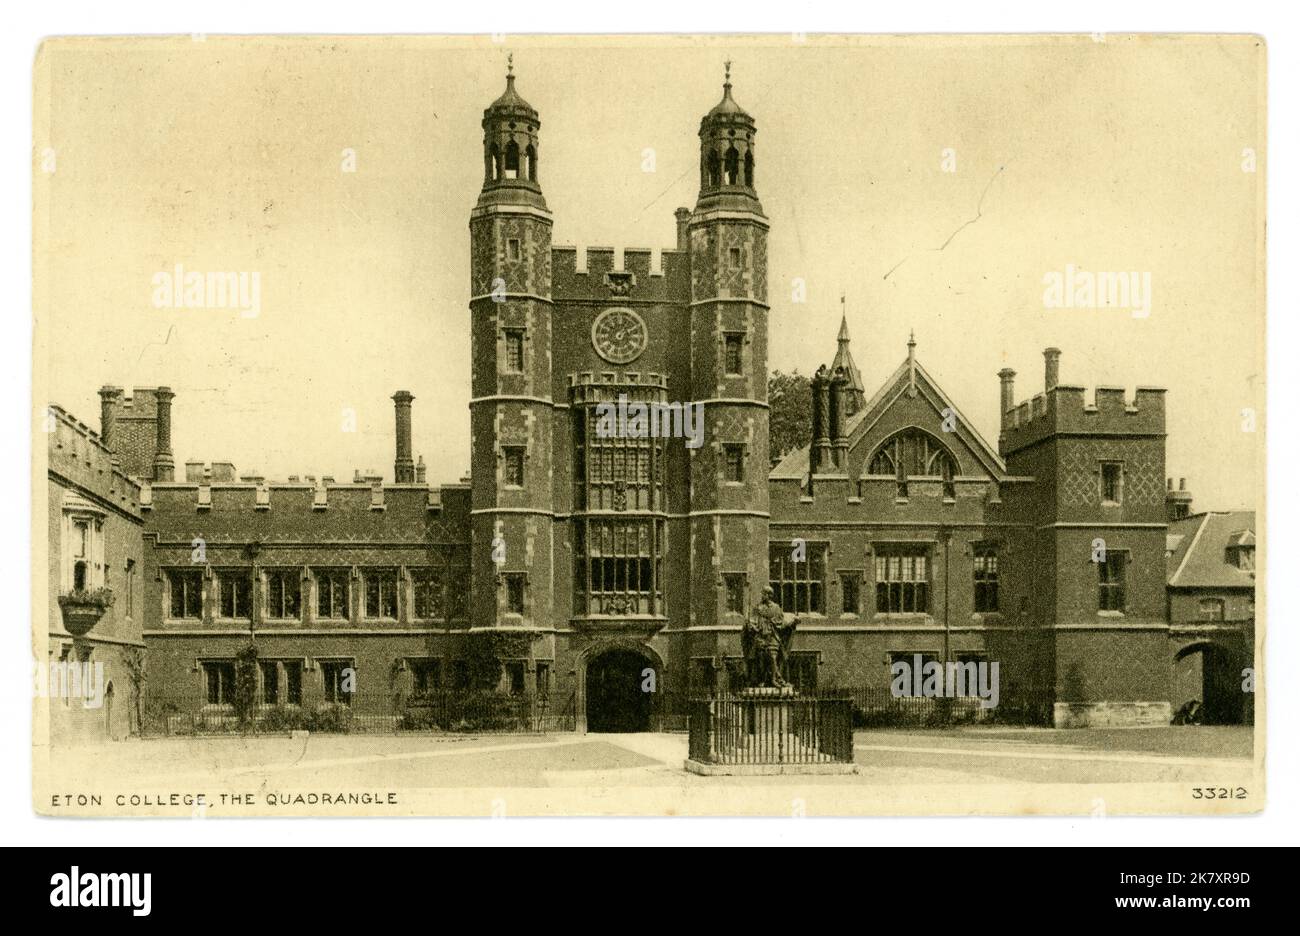 Original photochrom and sepia toned postcard of Eton College, an independent school with boarders. Prince William and Prince Harry, British Royals, attended this school. Postcard is of exterior showing the Quadrangle and clock tower, Lupton's Tower, School Yard, Twenty prime ministers were schooled at Eton College. Eton, Berkshire, England, U.K., circa 1910. Stock Photo